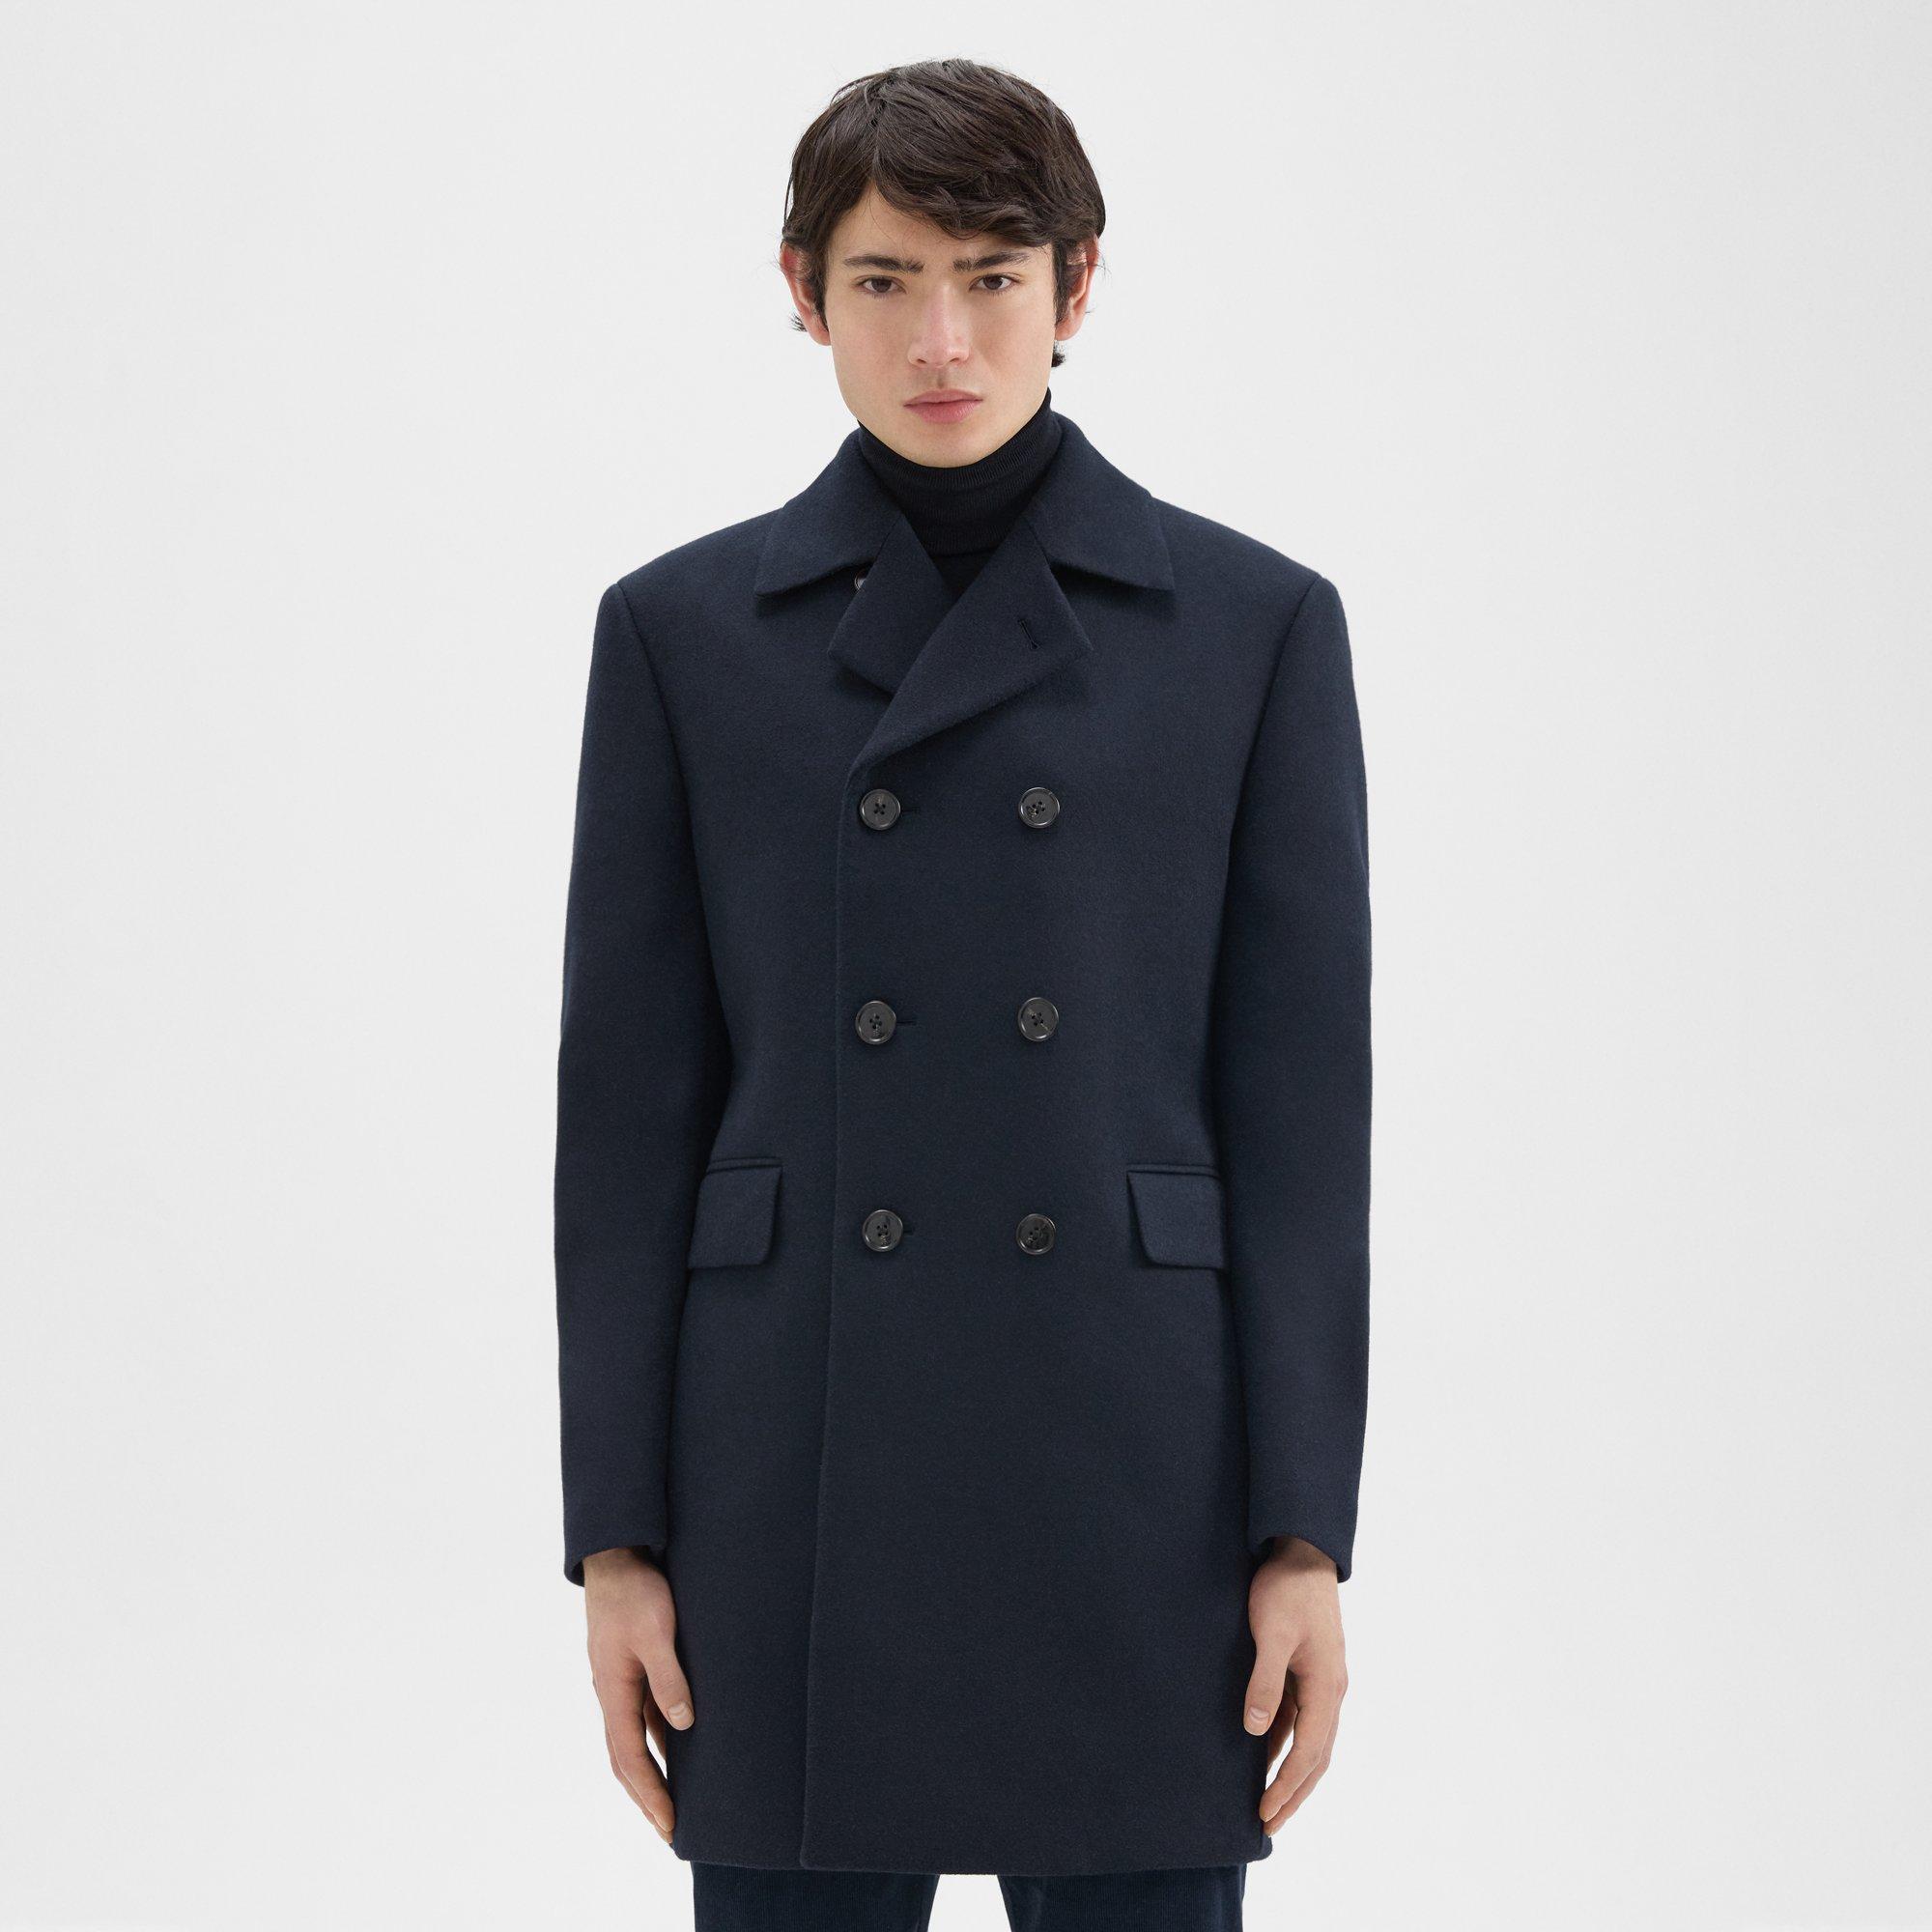 Theory Krasner Double-Breasted Coat in Recycled Wool-Blend Melton